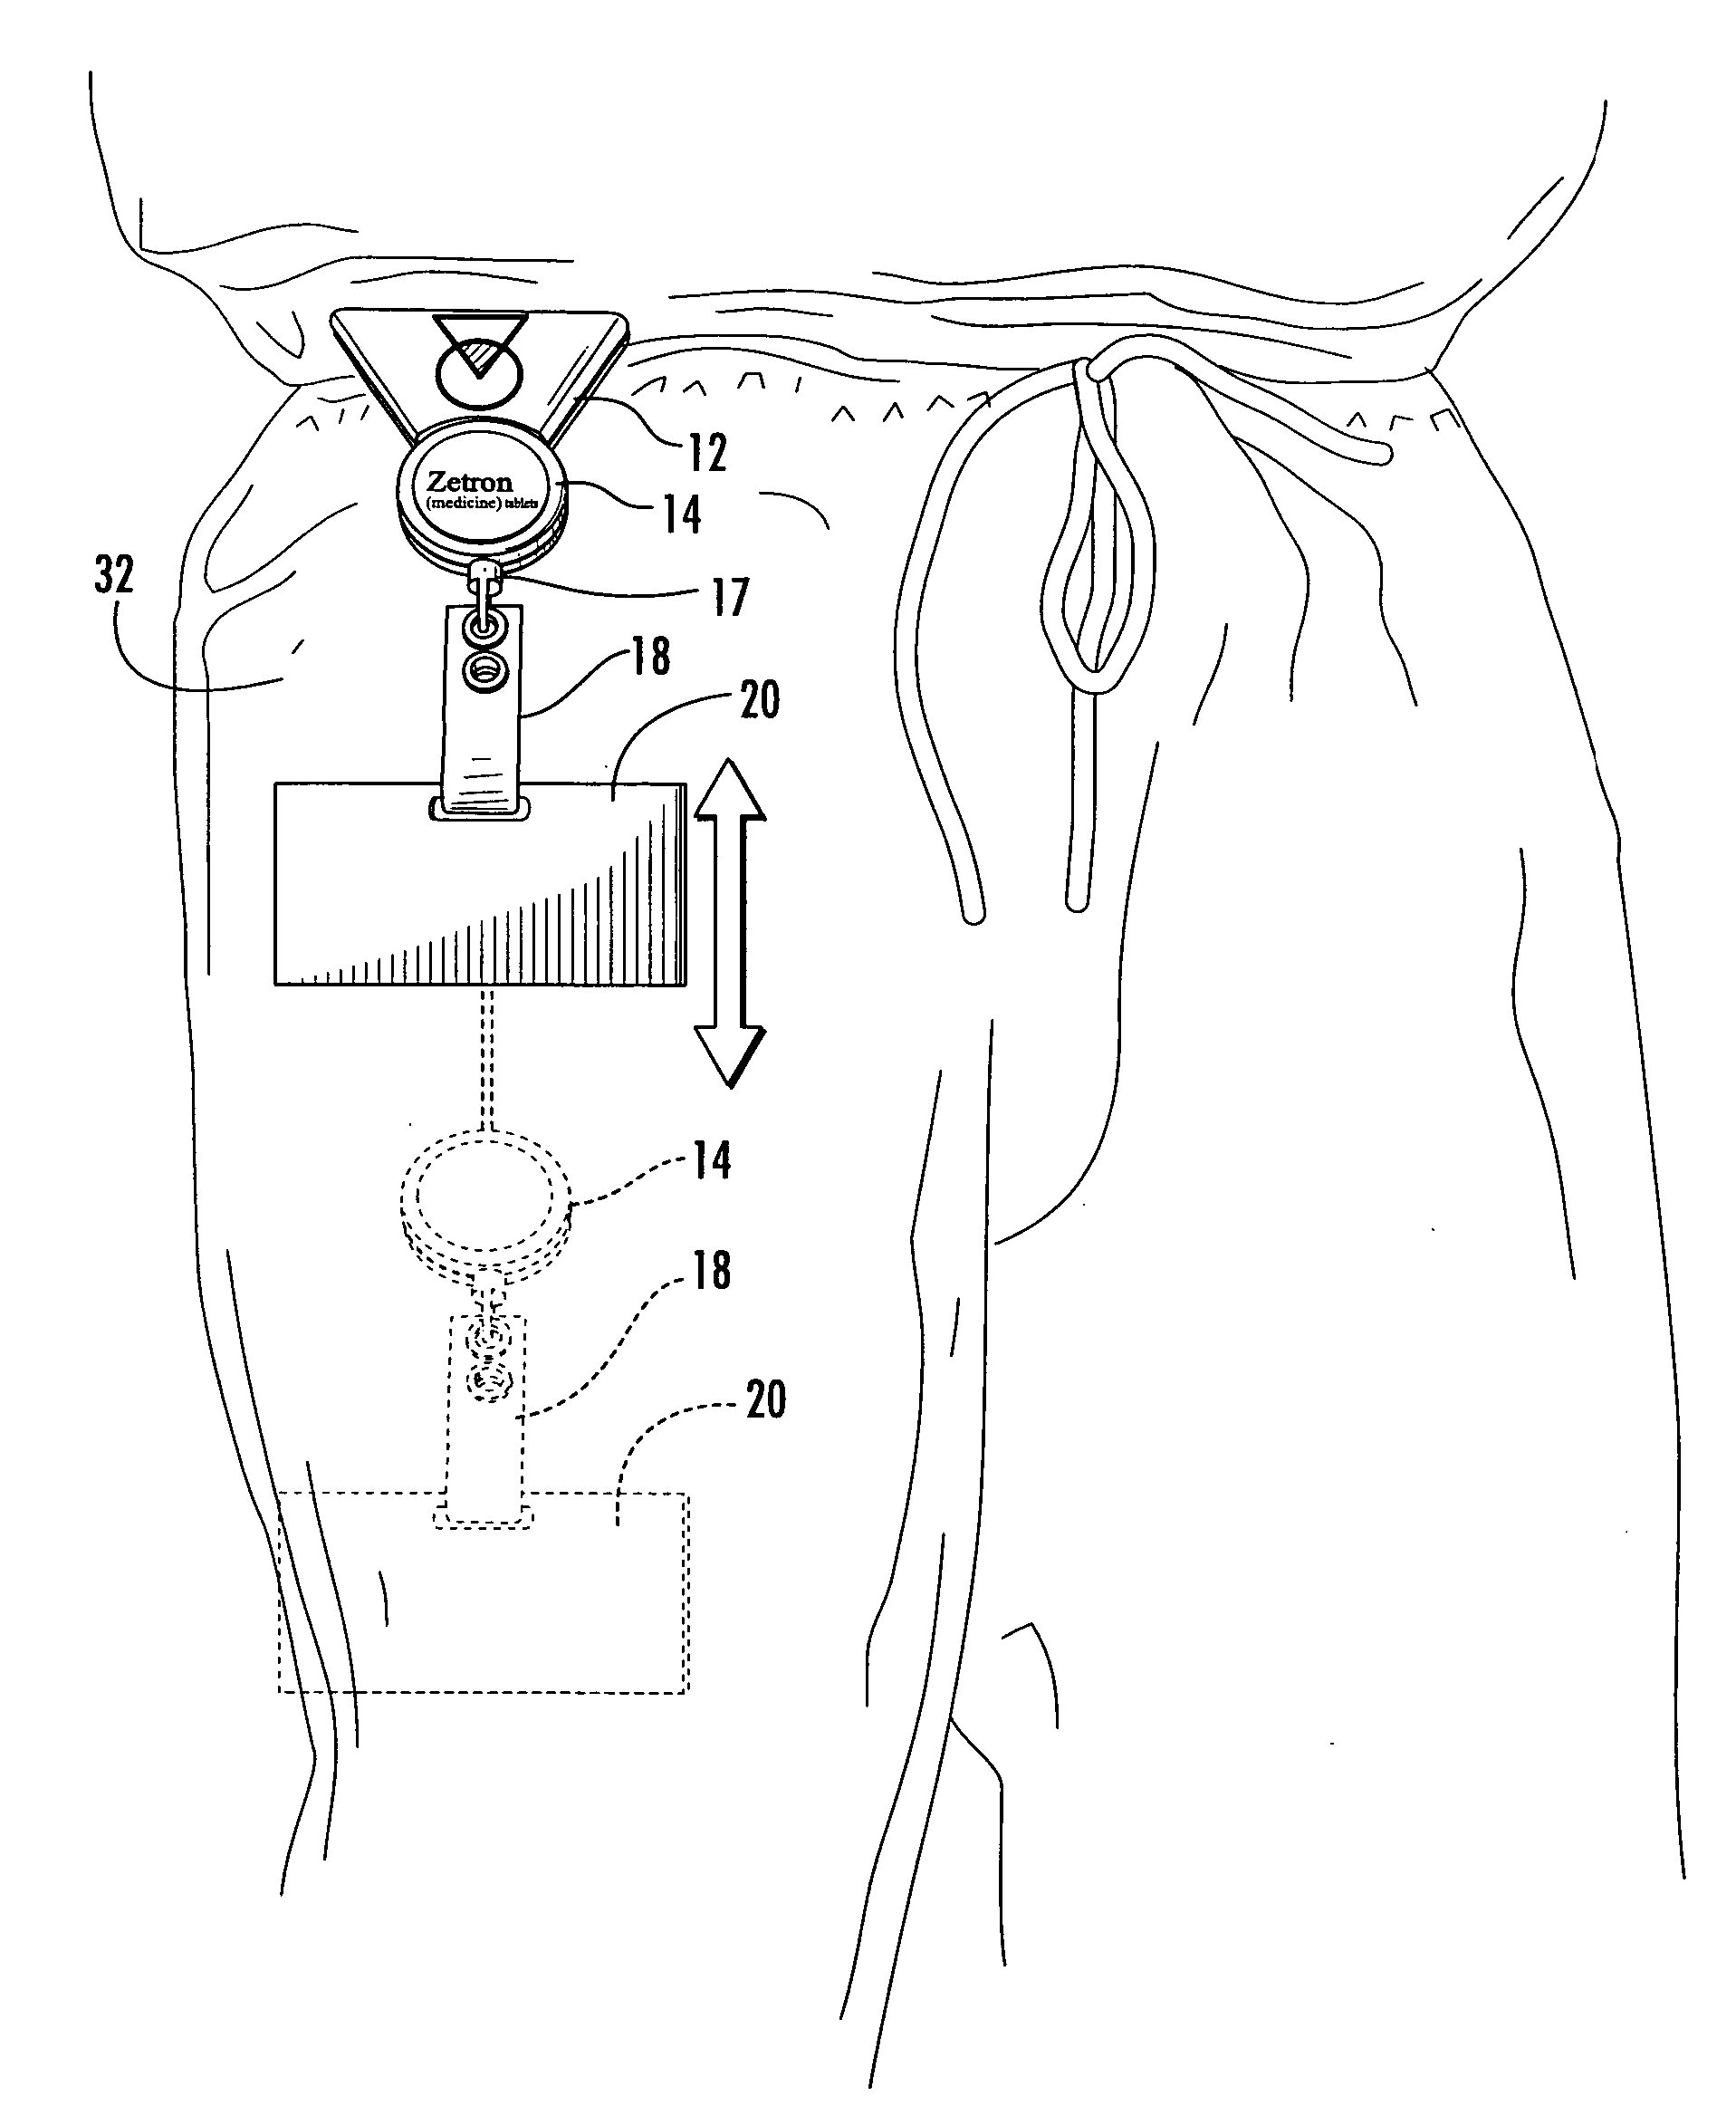 Promotional badge holding apparatus